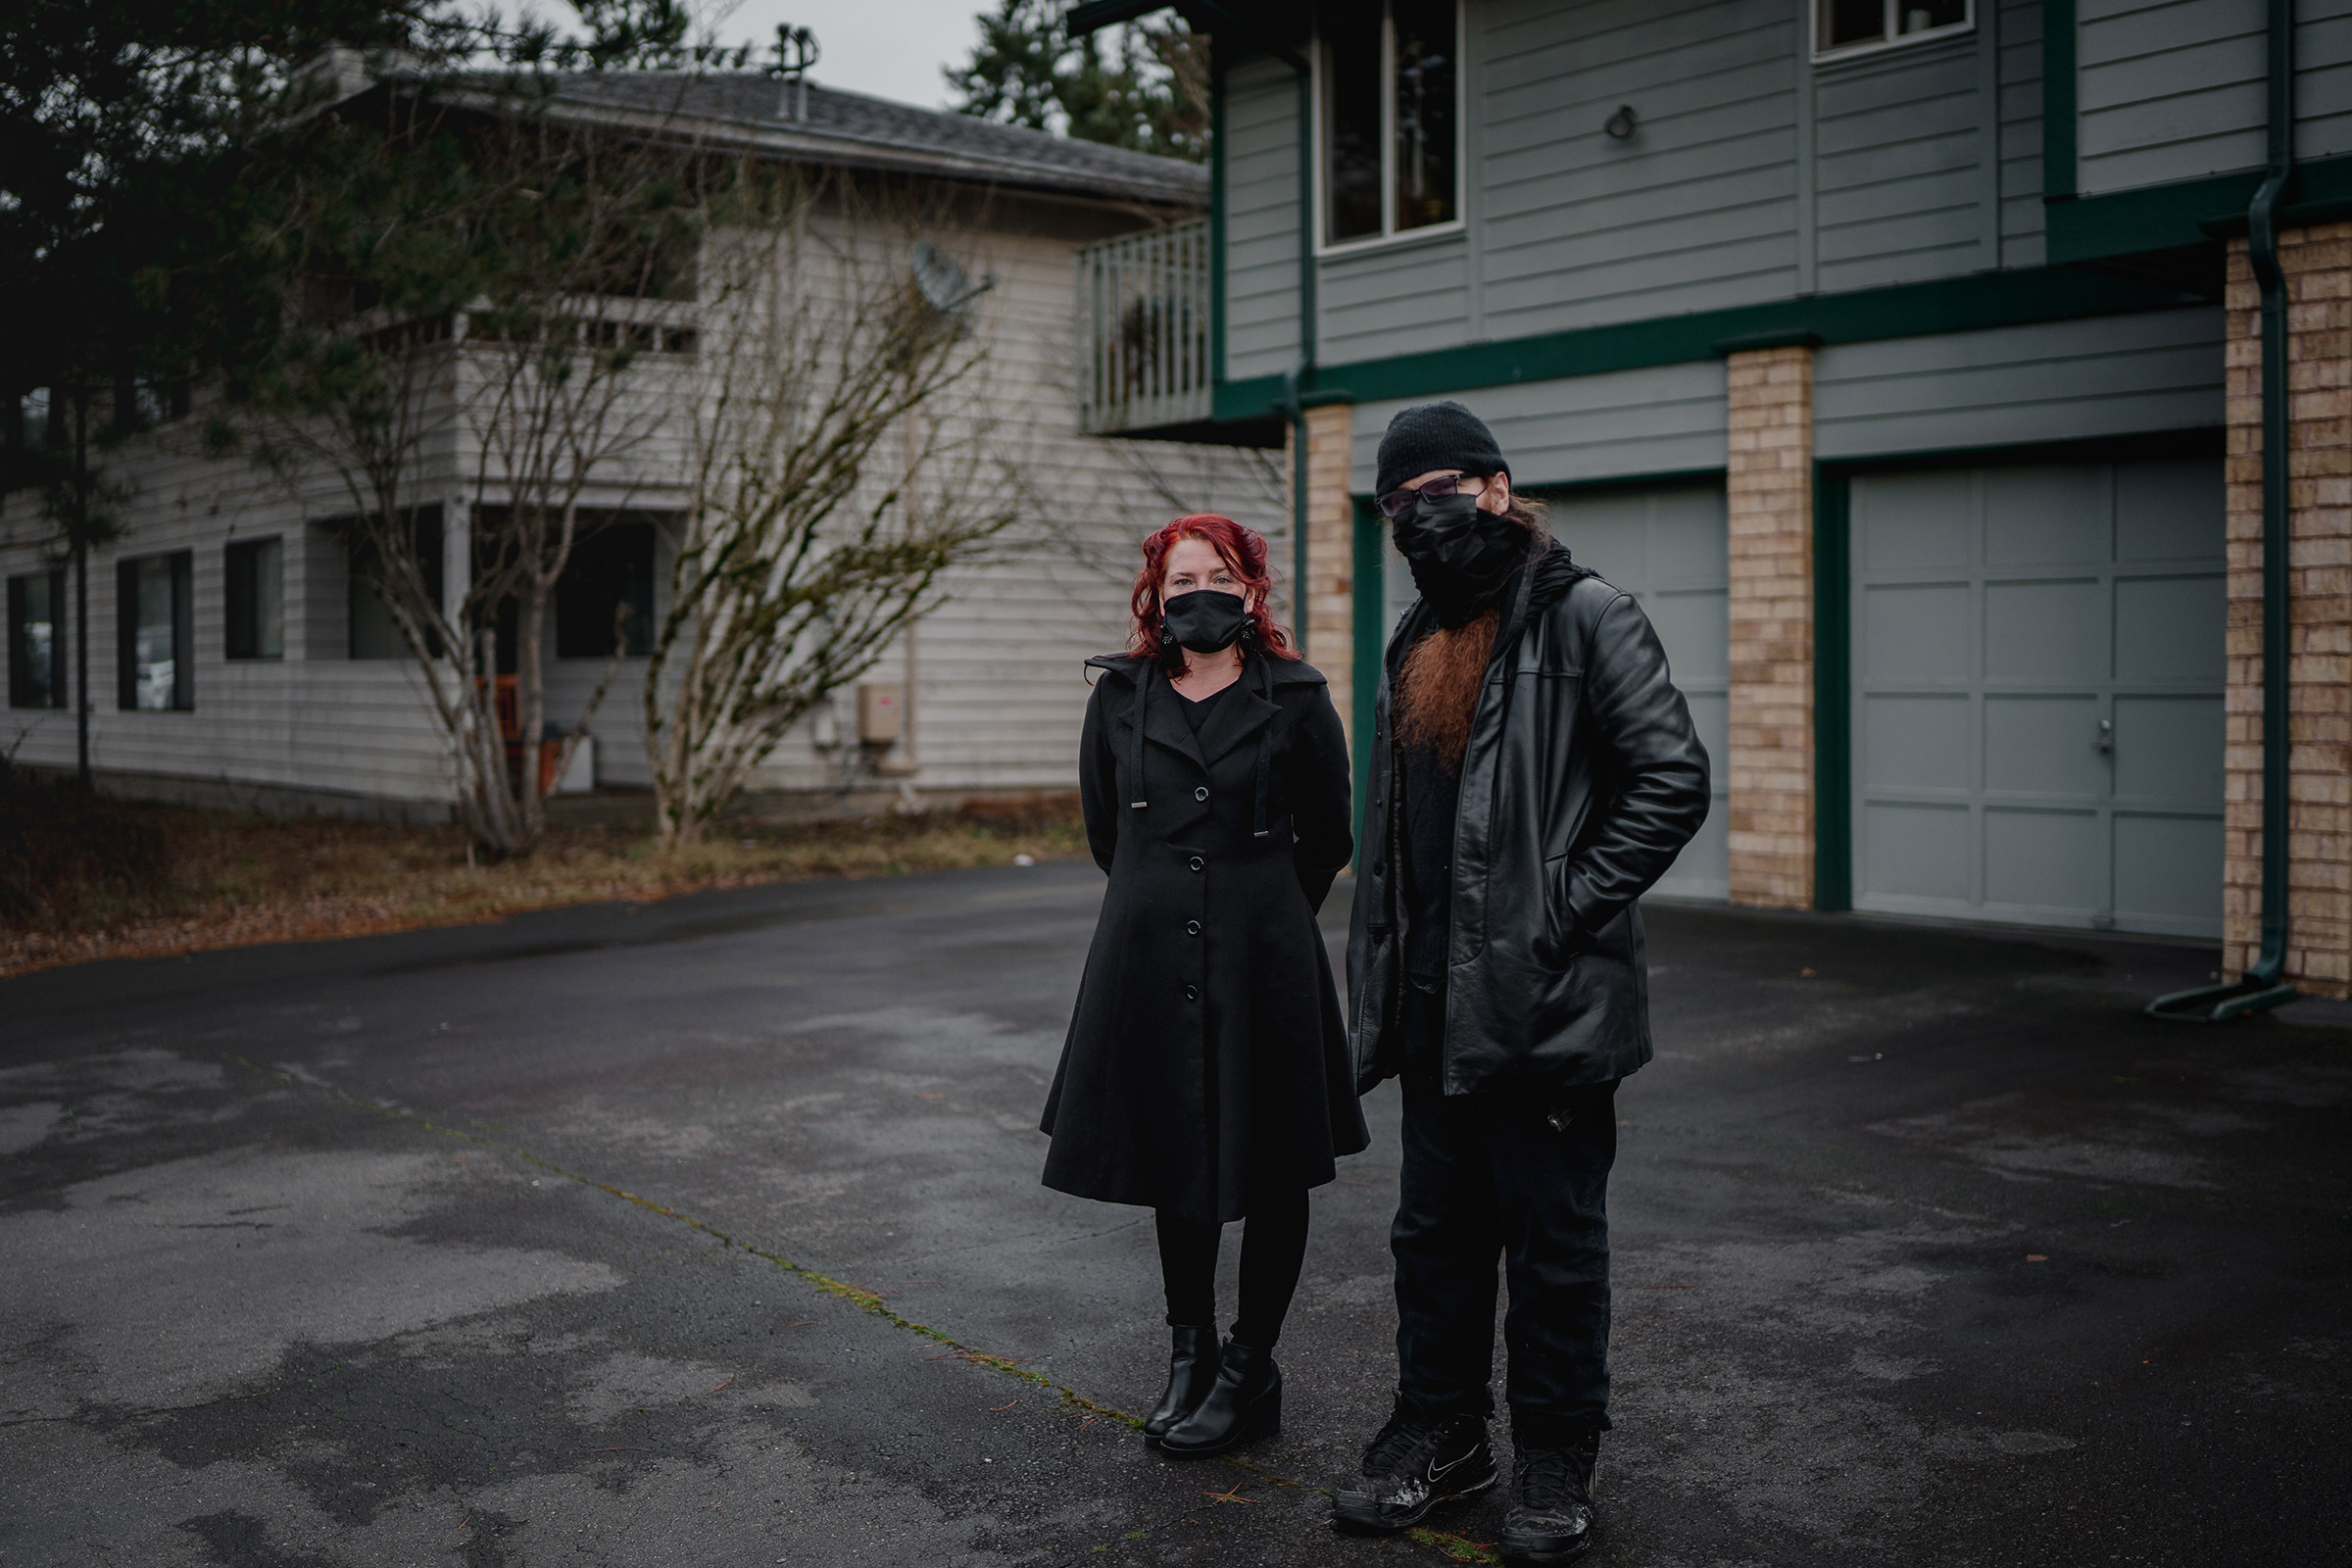 Landlord Rian de Laat, left, and tenant Ollie Aldama, in front of the condo that Aldama rents from de Laat in Seattle. (Jovelle Tamayo for TIME)